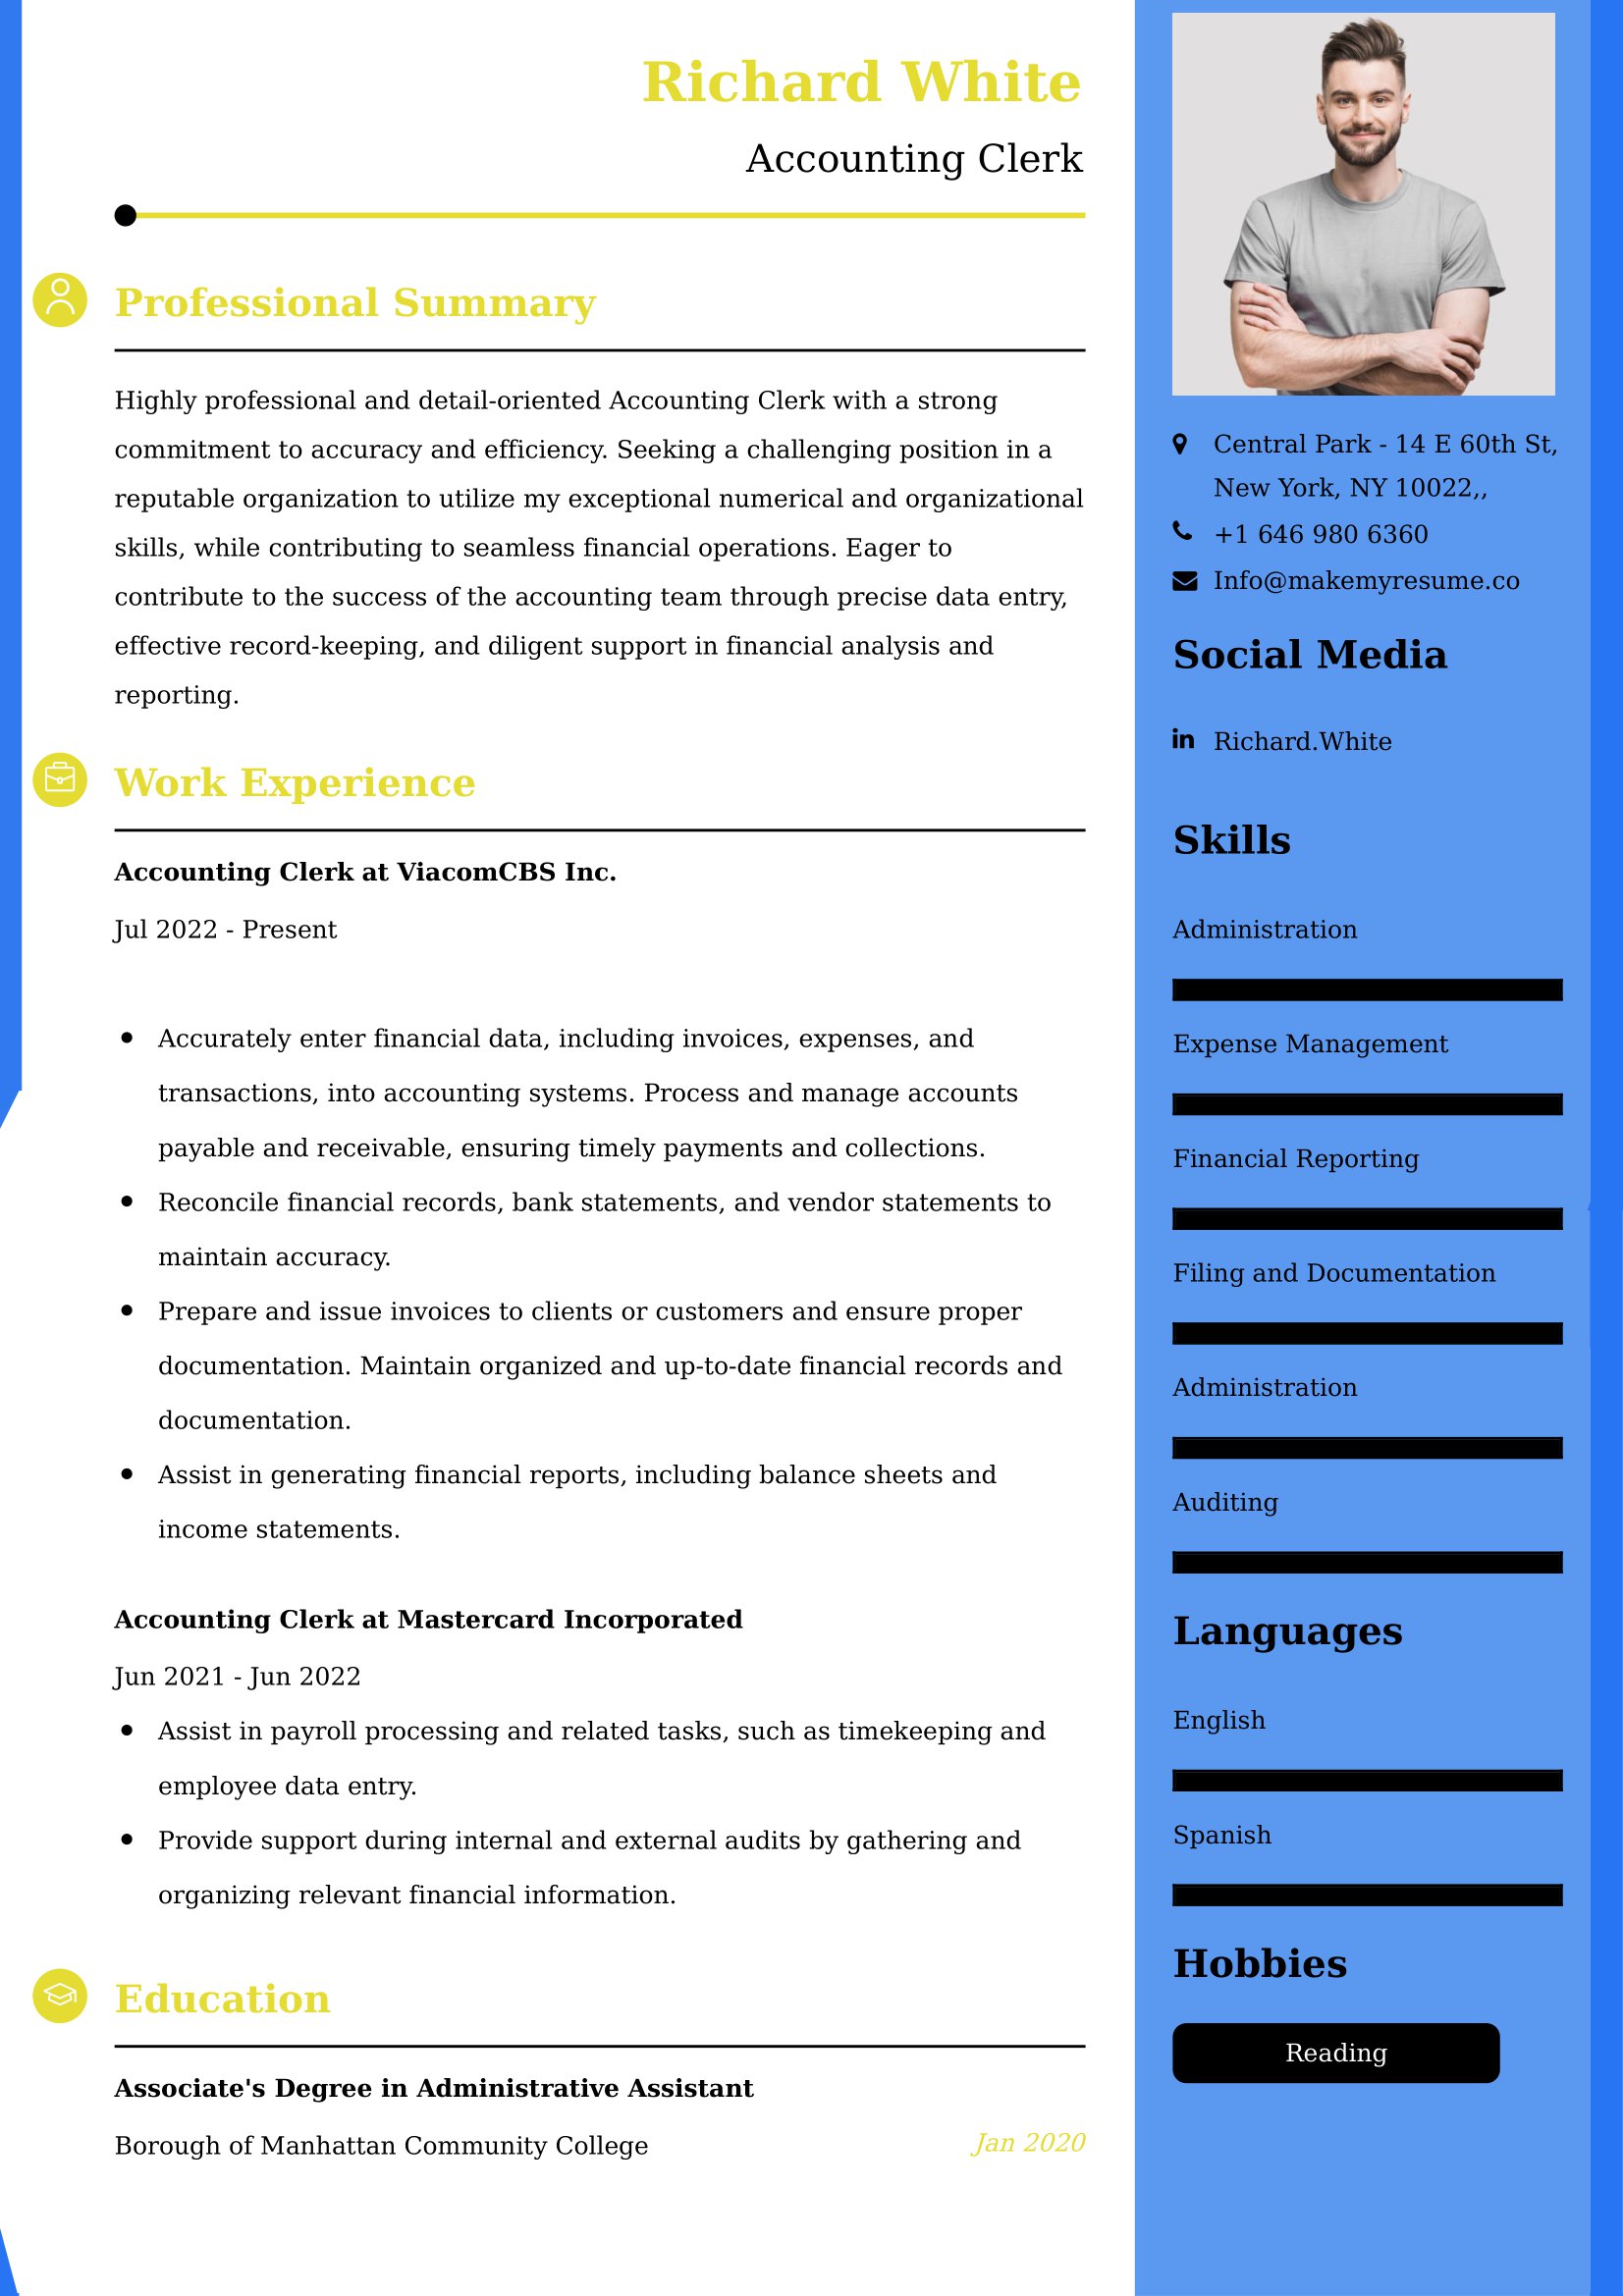 Best Administrative Assistant Resume Examples for UK